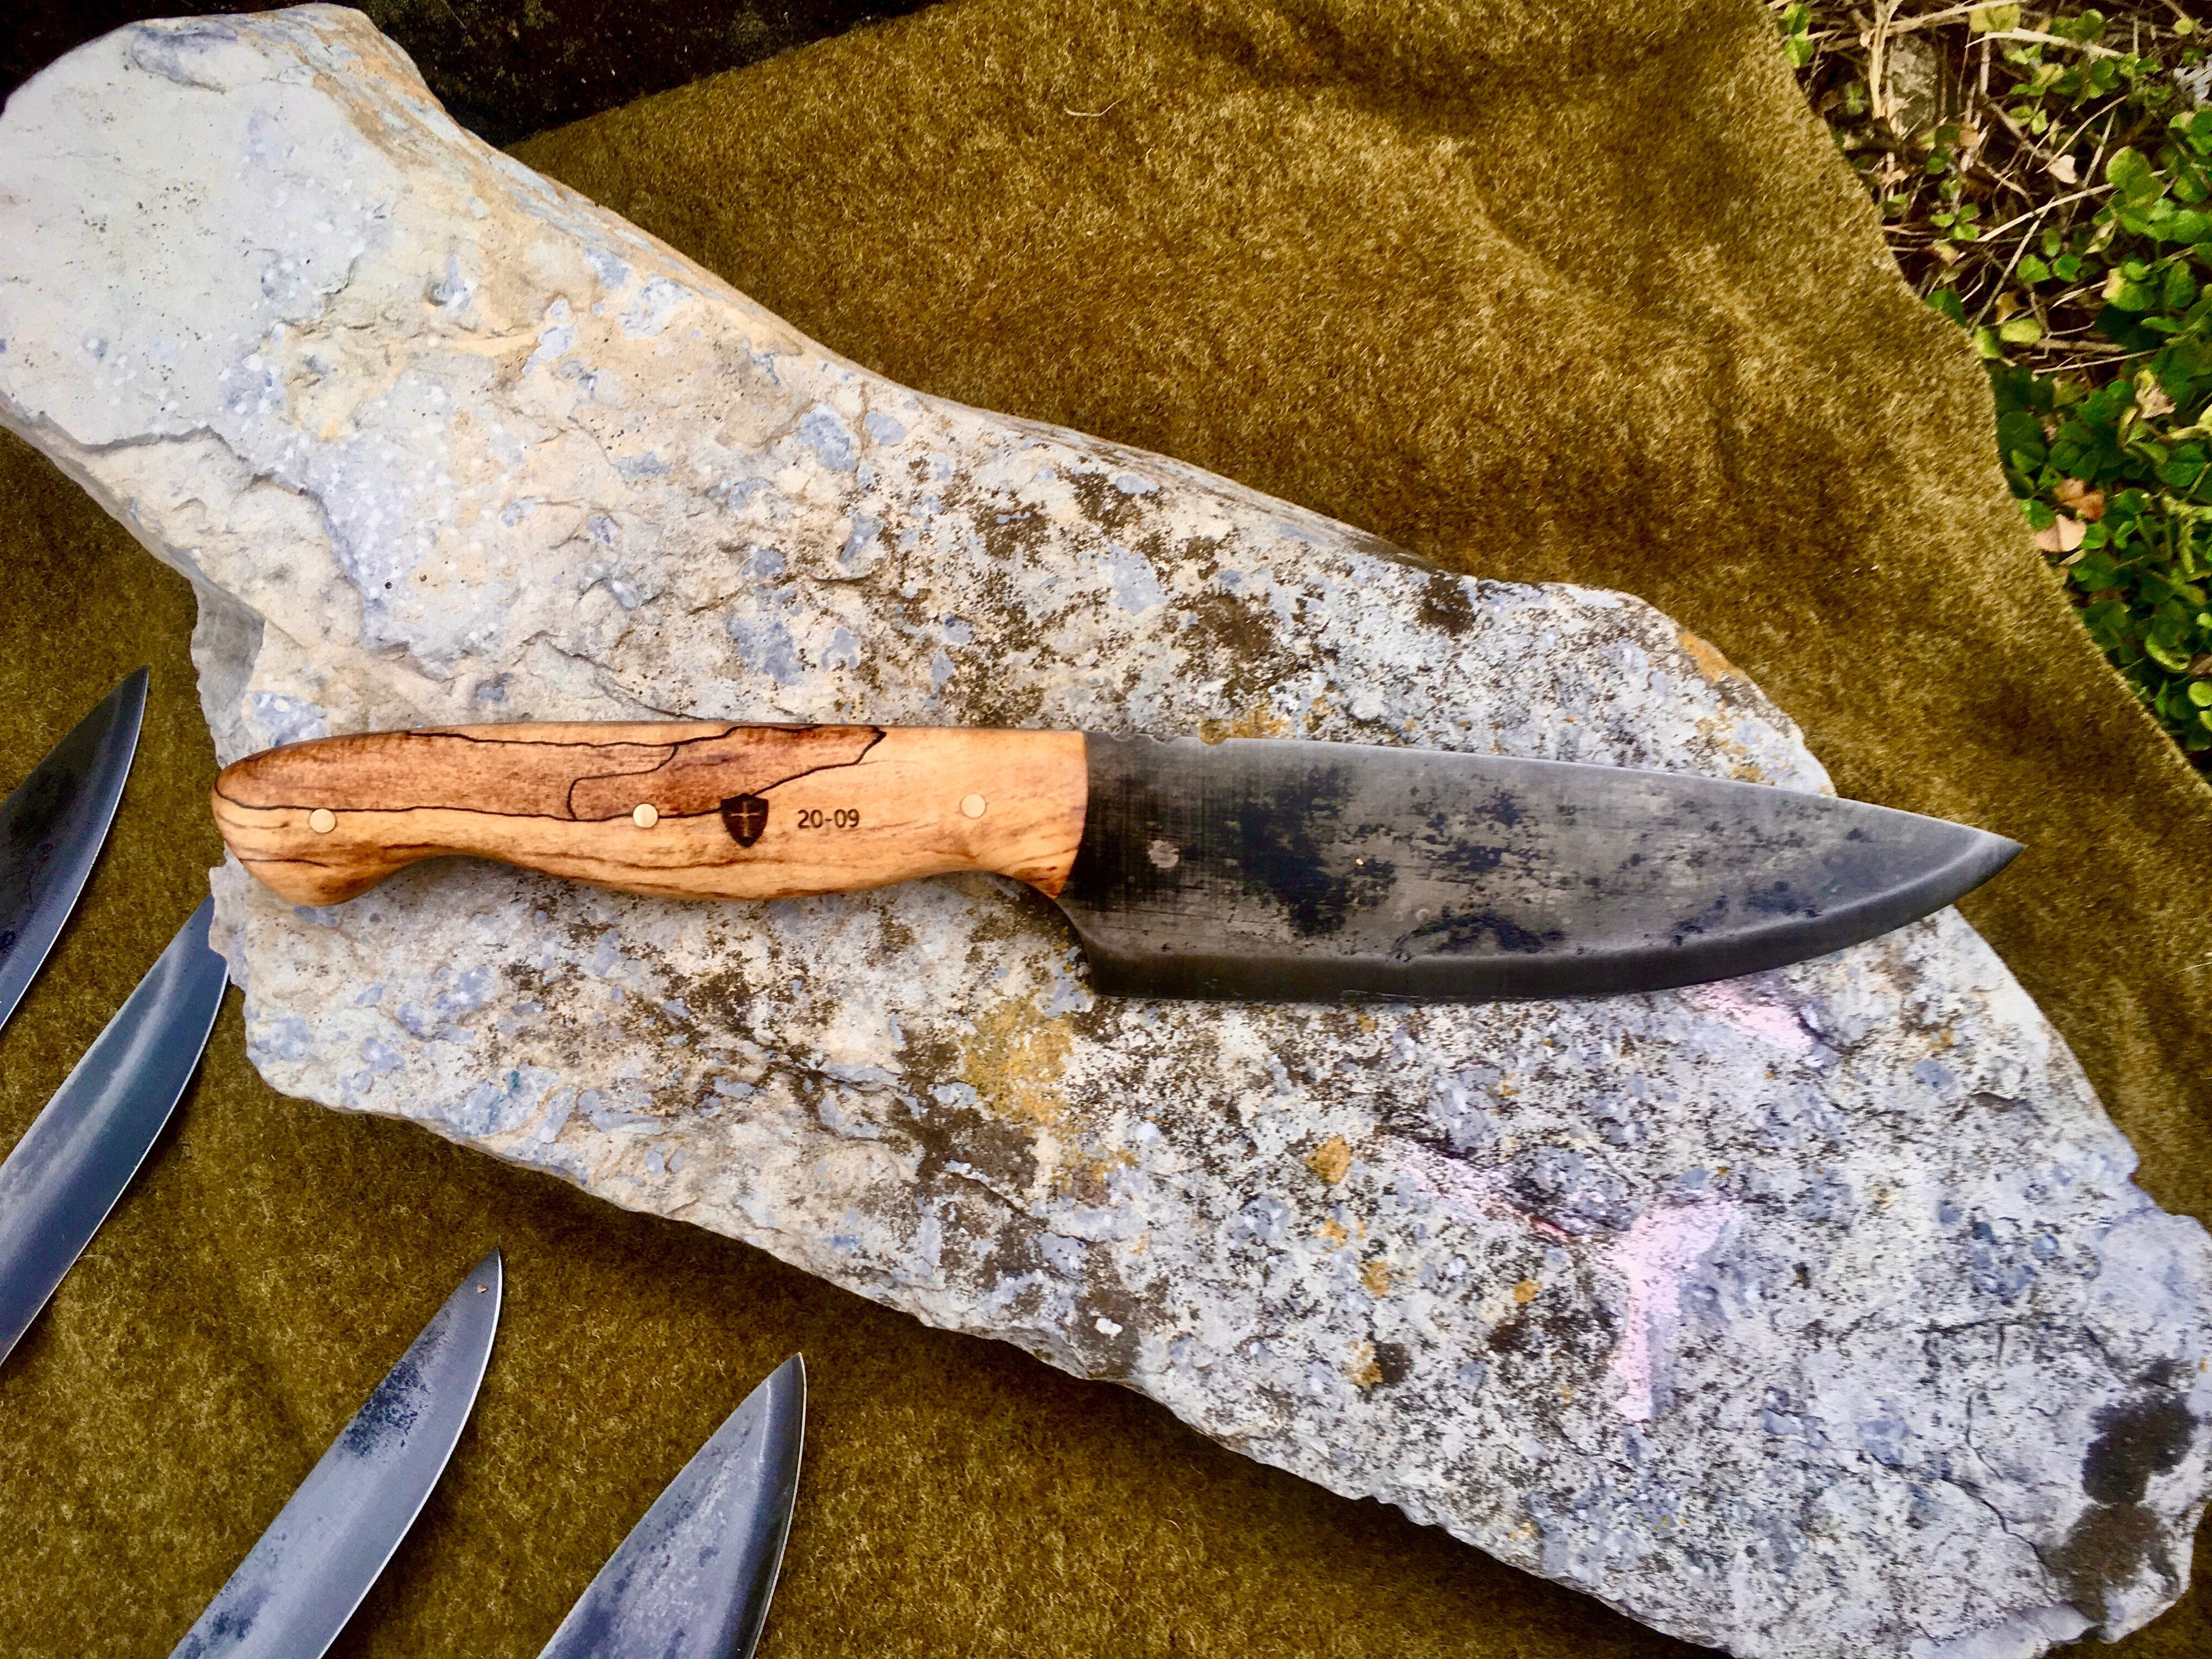 Hand Forged Paring Knife 20-04